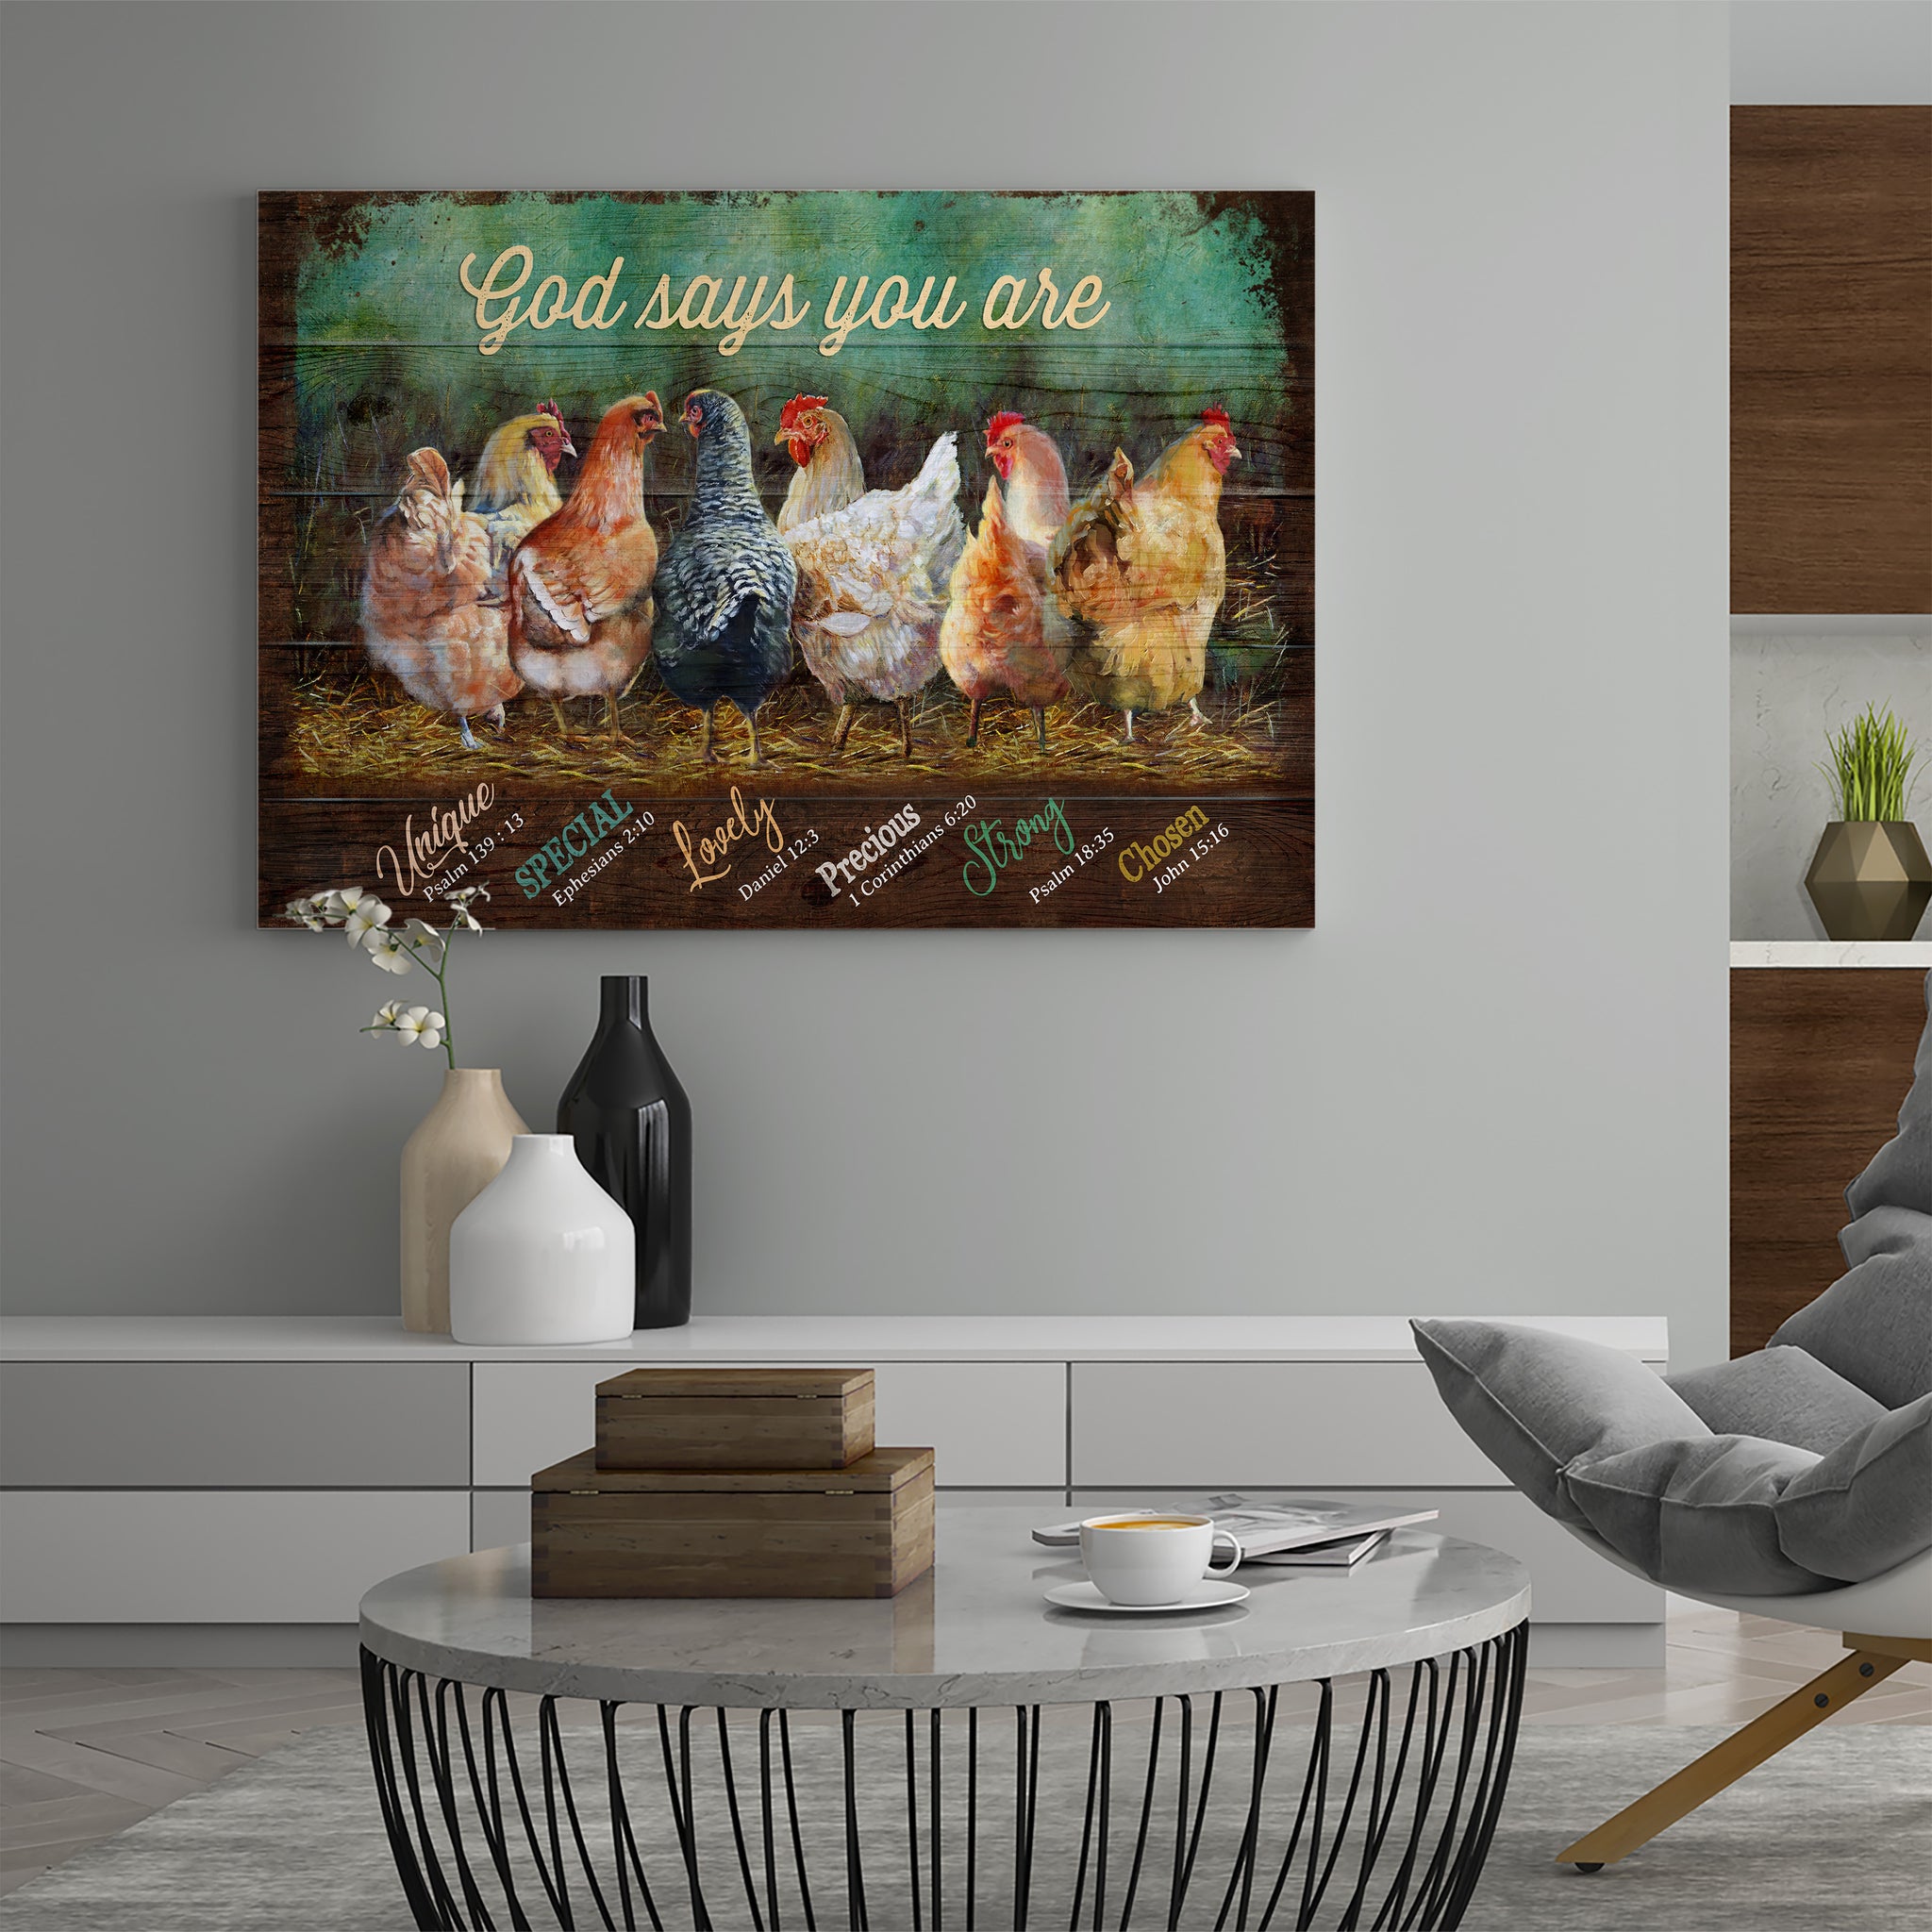 Poster Wall, God Says You Are Canvas, Chicken Lover, Farmhouse Decor, Country Life, Flower Garden, Living Room Decorations